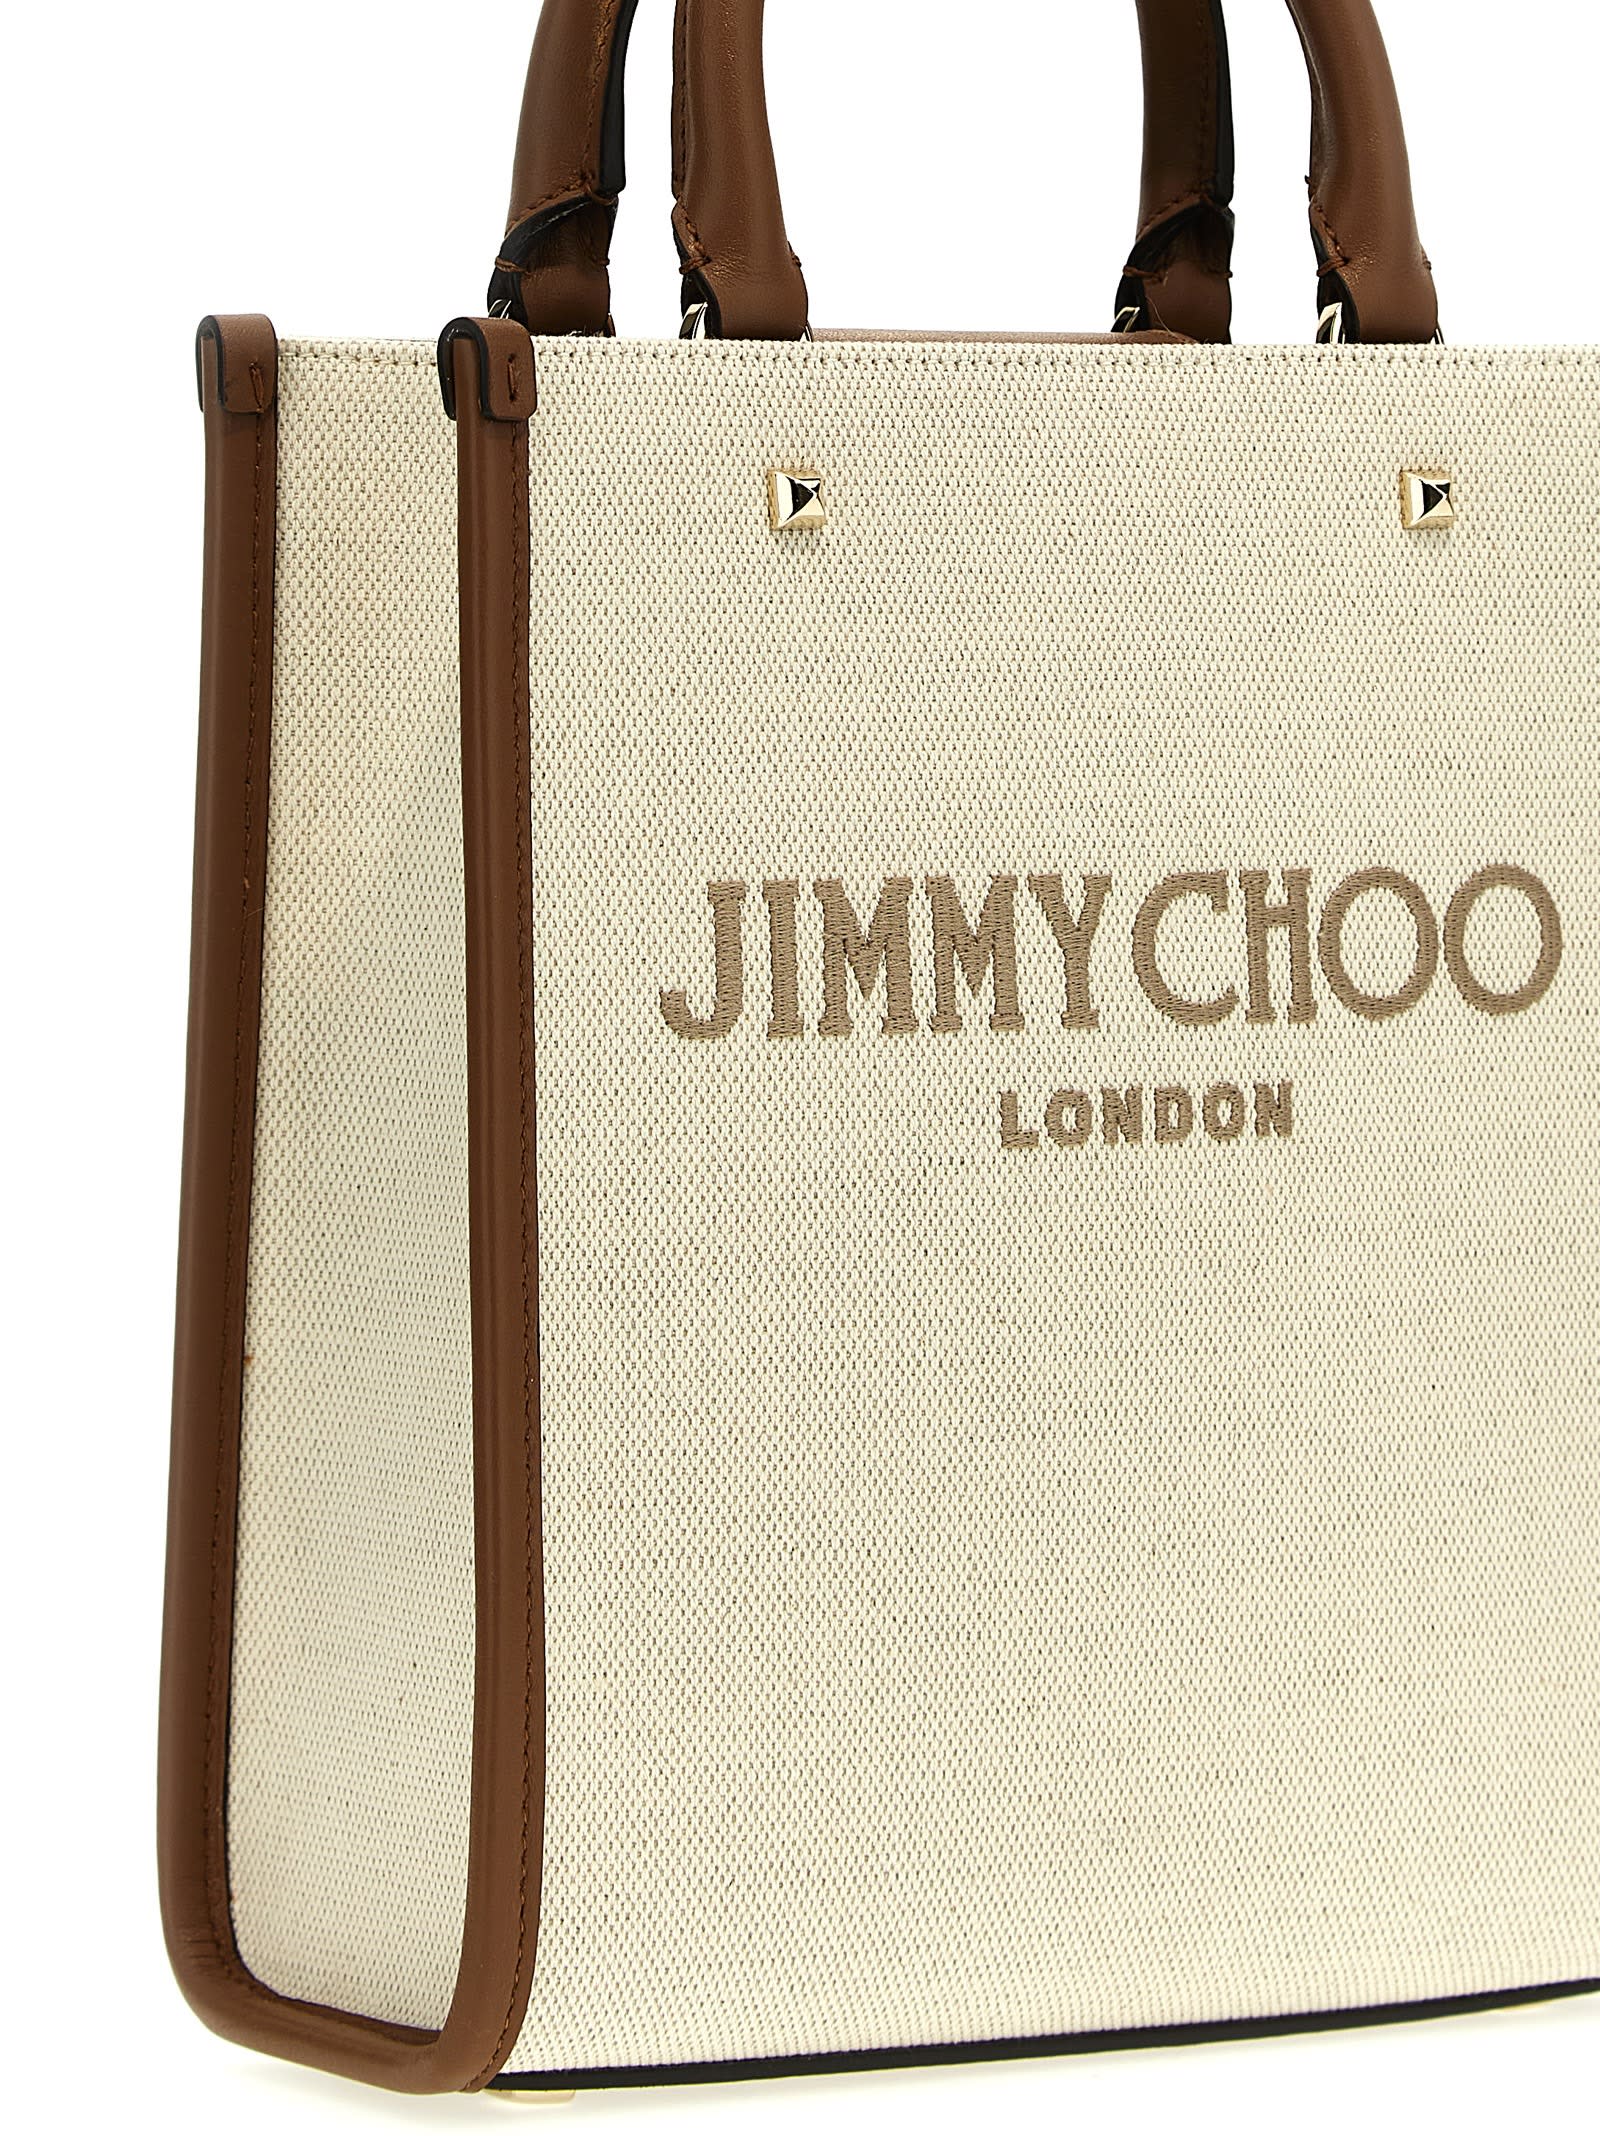 Shop Jimmy Choo Avenue S Shopping Bag In Natural Taupe Dark Tan Light Gold